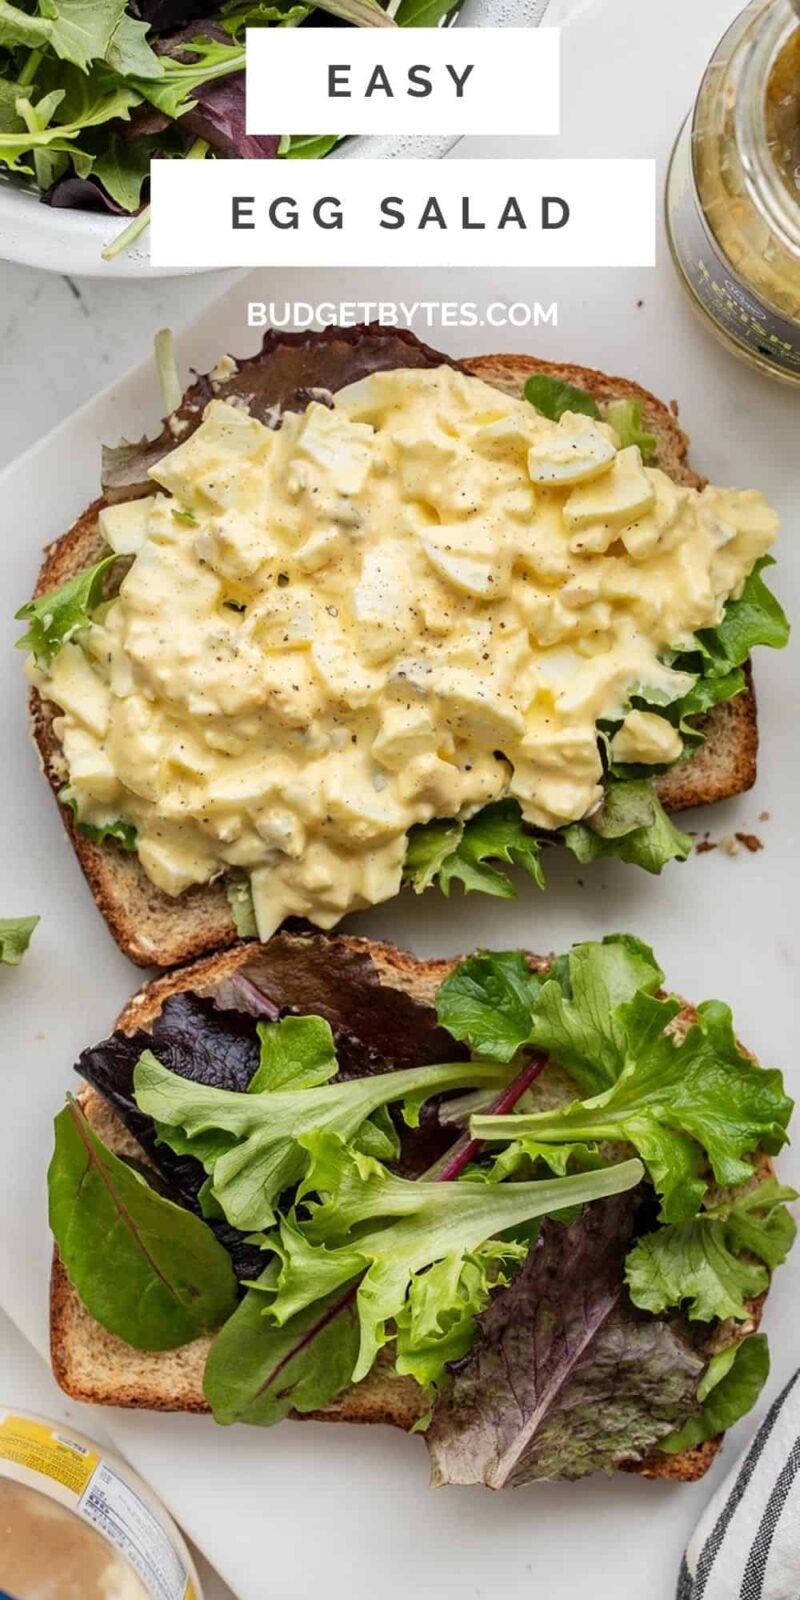 An open egg salad sandwich, title text at the top